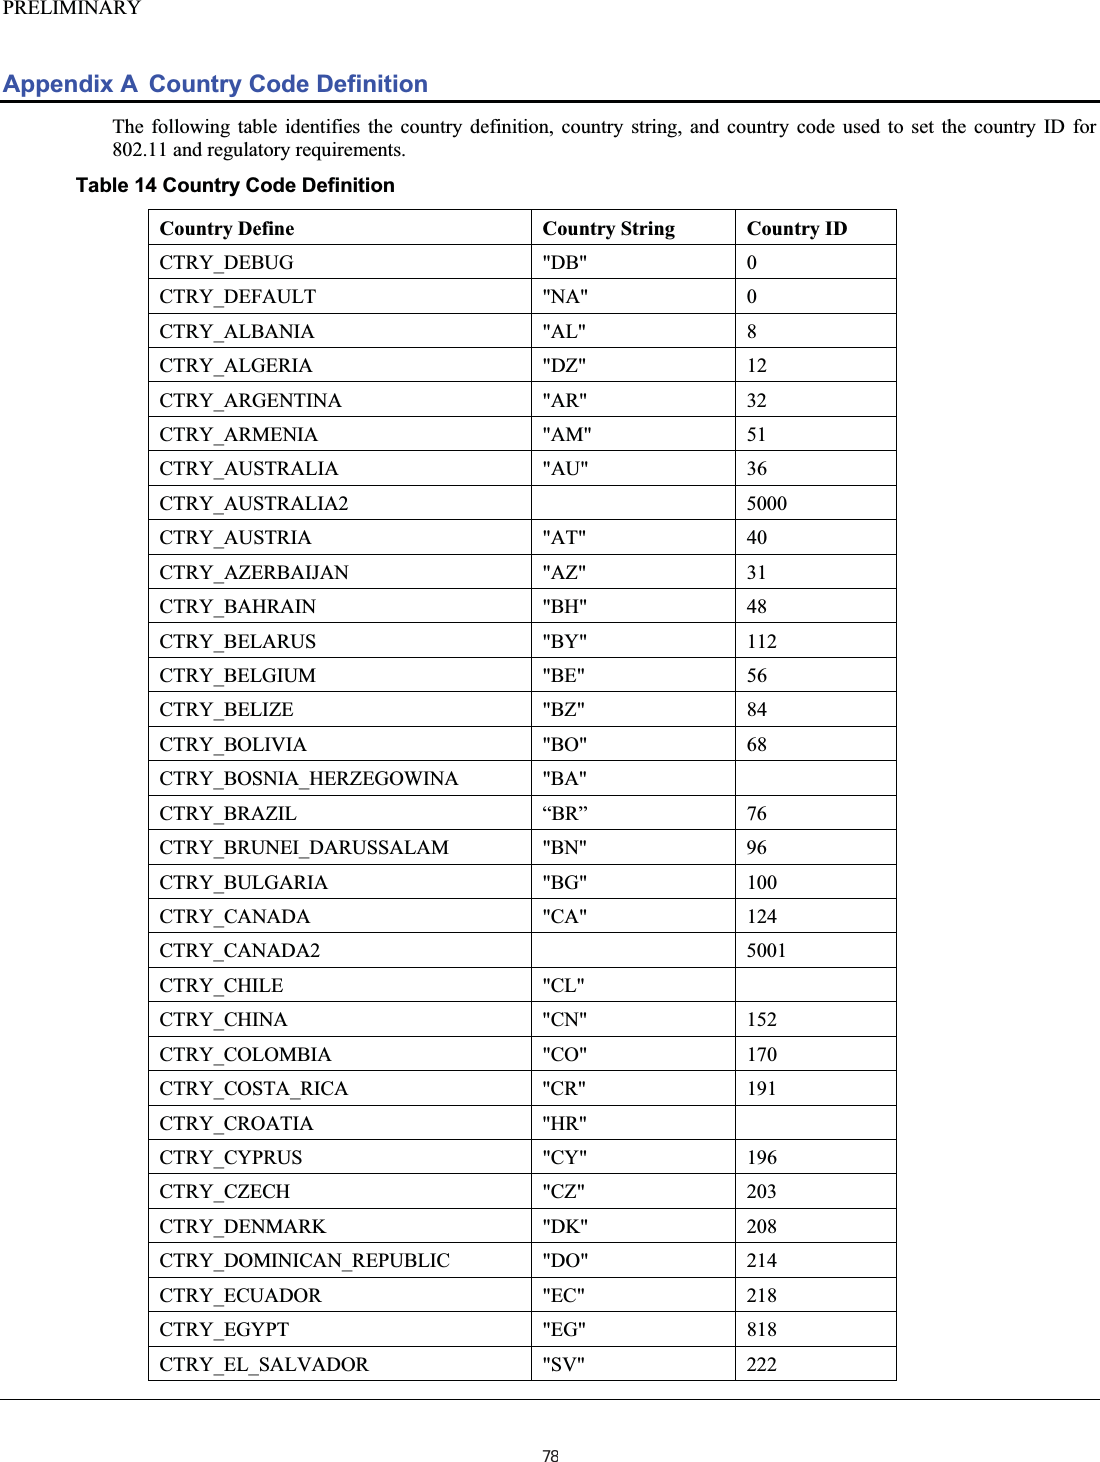 PRELIMINARY  Appendix A  Country Code Definition The following table identifies the country definition, country string, and country code used to set the country ID for 802.11 and regulatory requirements. Table 14 Country Code Definition Country Define  Country String  Country ID CTRY_DEBUG &quot;DB&quot; 0 CTRY_DEFAULT &quot;NA&quot; 0 CTRY_ALBANIA &quot;AL&quot; 8 CTRY_ALGERIA &quot;DZ&quot; 12 CTRY_ARGENTINA &quot;AR&quot; 32 CTRY_ARMENIA &quot;AM&quot; 51 CTRY_AUSTRALIA &quot;AU&quot; 36 CTRY_AUSTRALIA2   5000 CTRY_AUSTRIA &quot;AT&quot; 40 CTRY_AZERBAIJAN &quot;AZ&quot; 31 CTRY_BAHRAIN &quot;BH&quot; 48 CTRY_BELARUS &quot;BY&quot; 112 CTRY_BELGIUM &quot;BE&quot; 56 CTRY_BELIZE &quot;BZ&quot; 84 CTRY_BOLIVIA &quot;BO&quot; 68 CTRY_BOSNIA_HERZEGOWINA &quot;BA&quot;   CTRY_BRAZIL “BR” 76 CTRY_BRUNEI_DARUSSALAM &quot;BN&quot;  96  CTRY_BULGARIA &quot;BG&quot; 100 CTRY_CANADA &quot;CA&quot; 124 CTRY_CANADA2  5001 CTRY_CHILE &quot;CL&quot;  CTRY_CHINA &quot;CN&quot; 152 CTRY_COLOMBIA &quot;CO&quot; 170 CTRY_COSTA_RICA &quot;CR&quot; 191 CTRY_CROATIA &quot;HR&quot;  CTRY_CYPRUS &quot;CY&quot; 196 CTRY_CZECH &quot;CZ&quot; 203 CTRY_DENMARK &quot;DK&quot; 208 CTRY_DOMINICAN_REPUBLIC &quot;DO&quot;  214 CTRY_ECUADOR &quot;EC&quot; 218 CTRY_EGYPT &quot;EG&quot; 818 CTRY_EL_SALVADOR &quot;SV&quot; 222 78